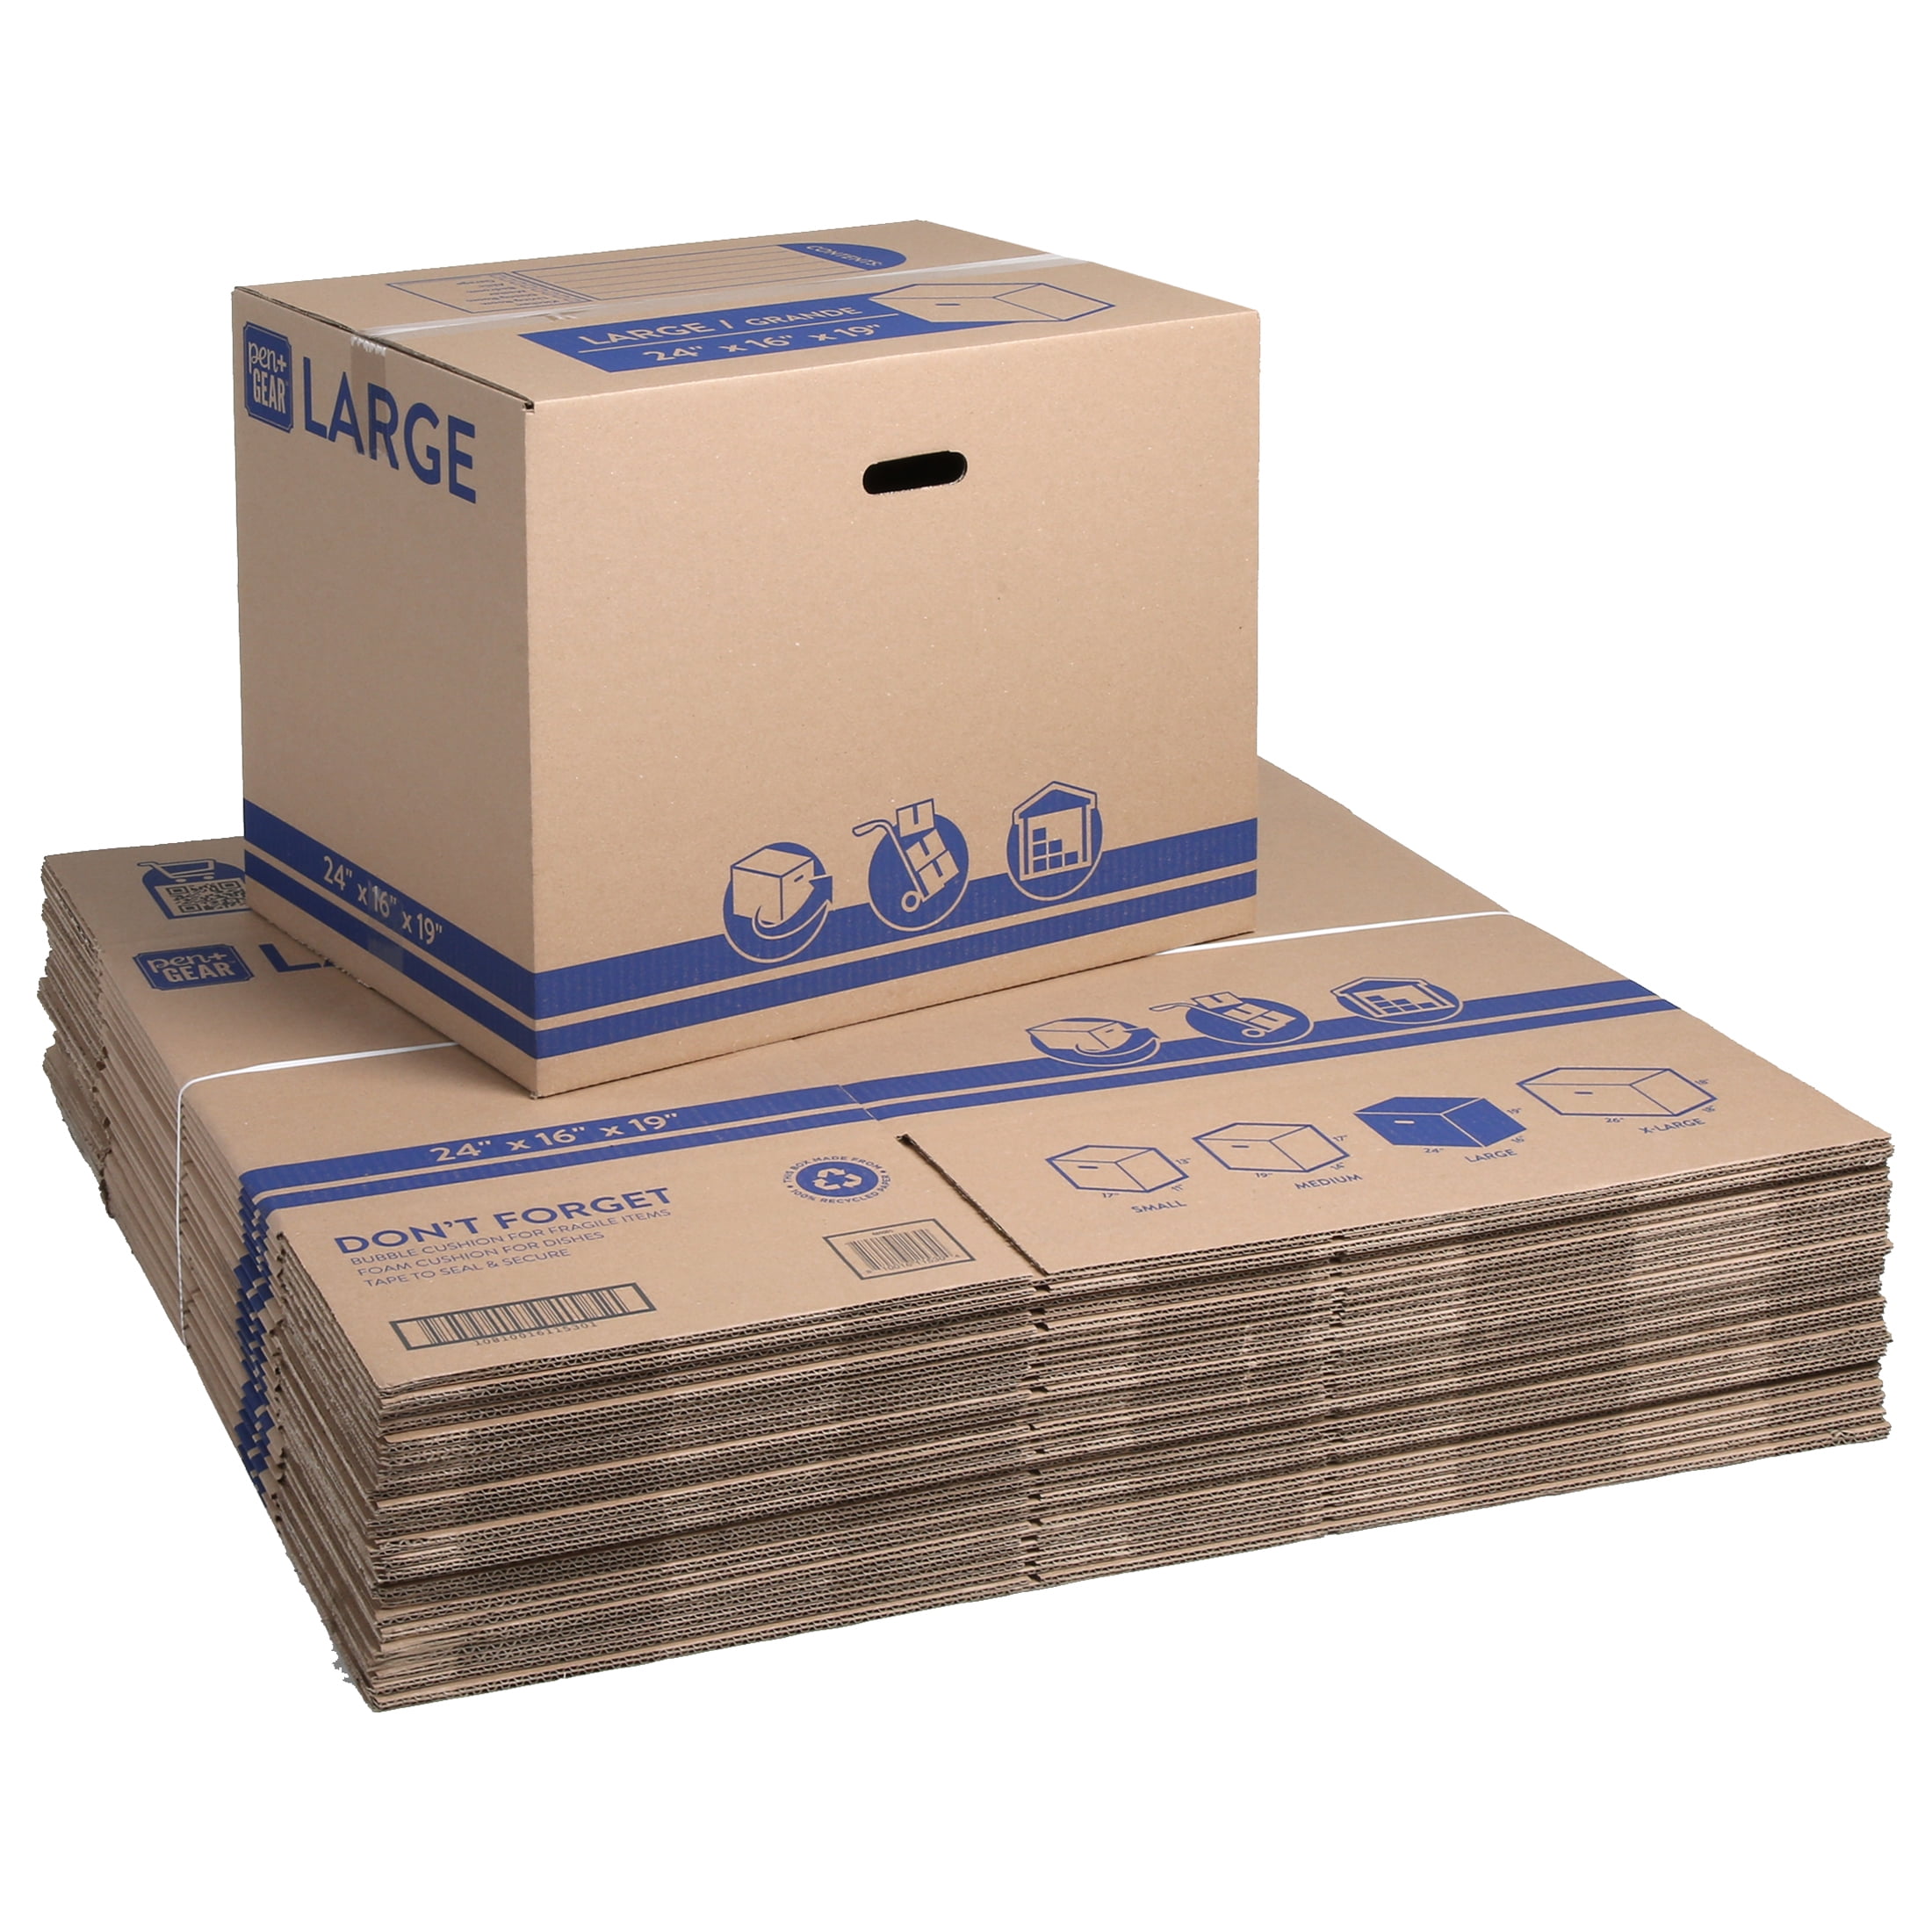 20 LARGE D/W CARDBOARD REMOVAL EMPTY BOXES 16x16x16" 